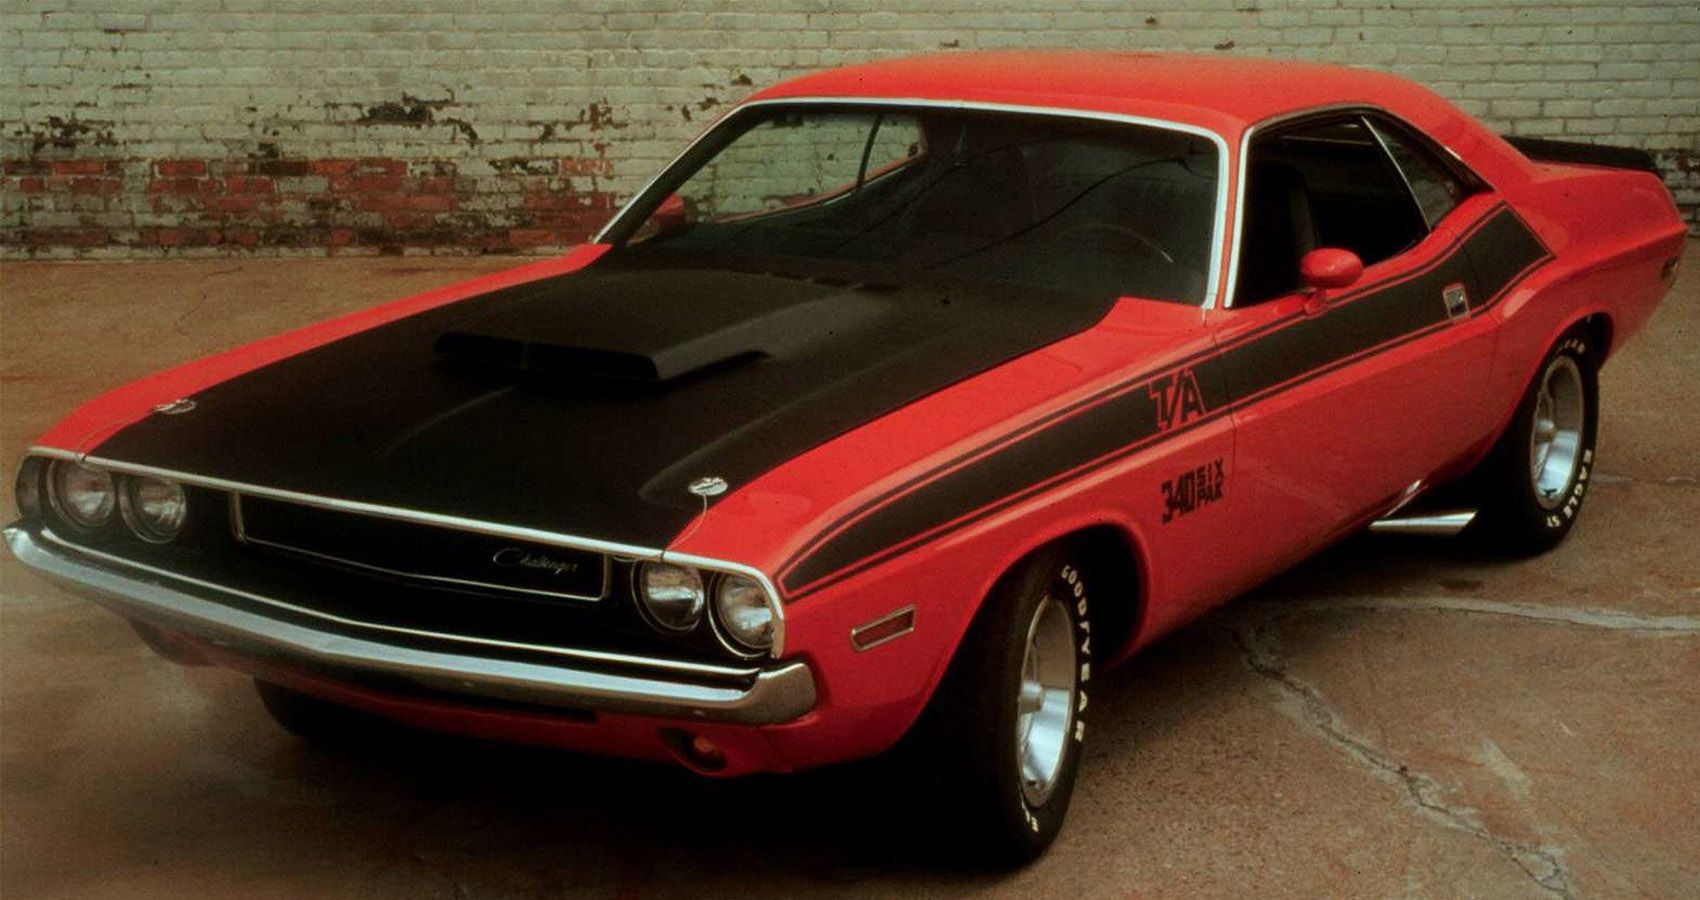 1970 Dodge Challenger T:A in Orange Front View